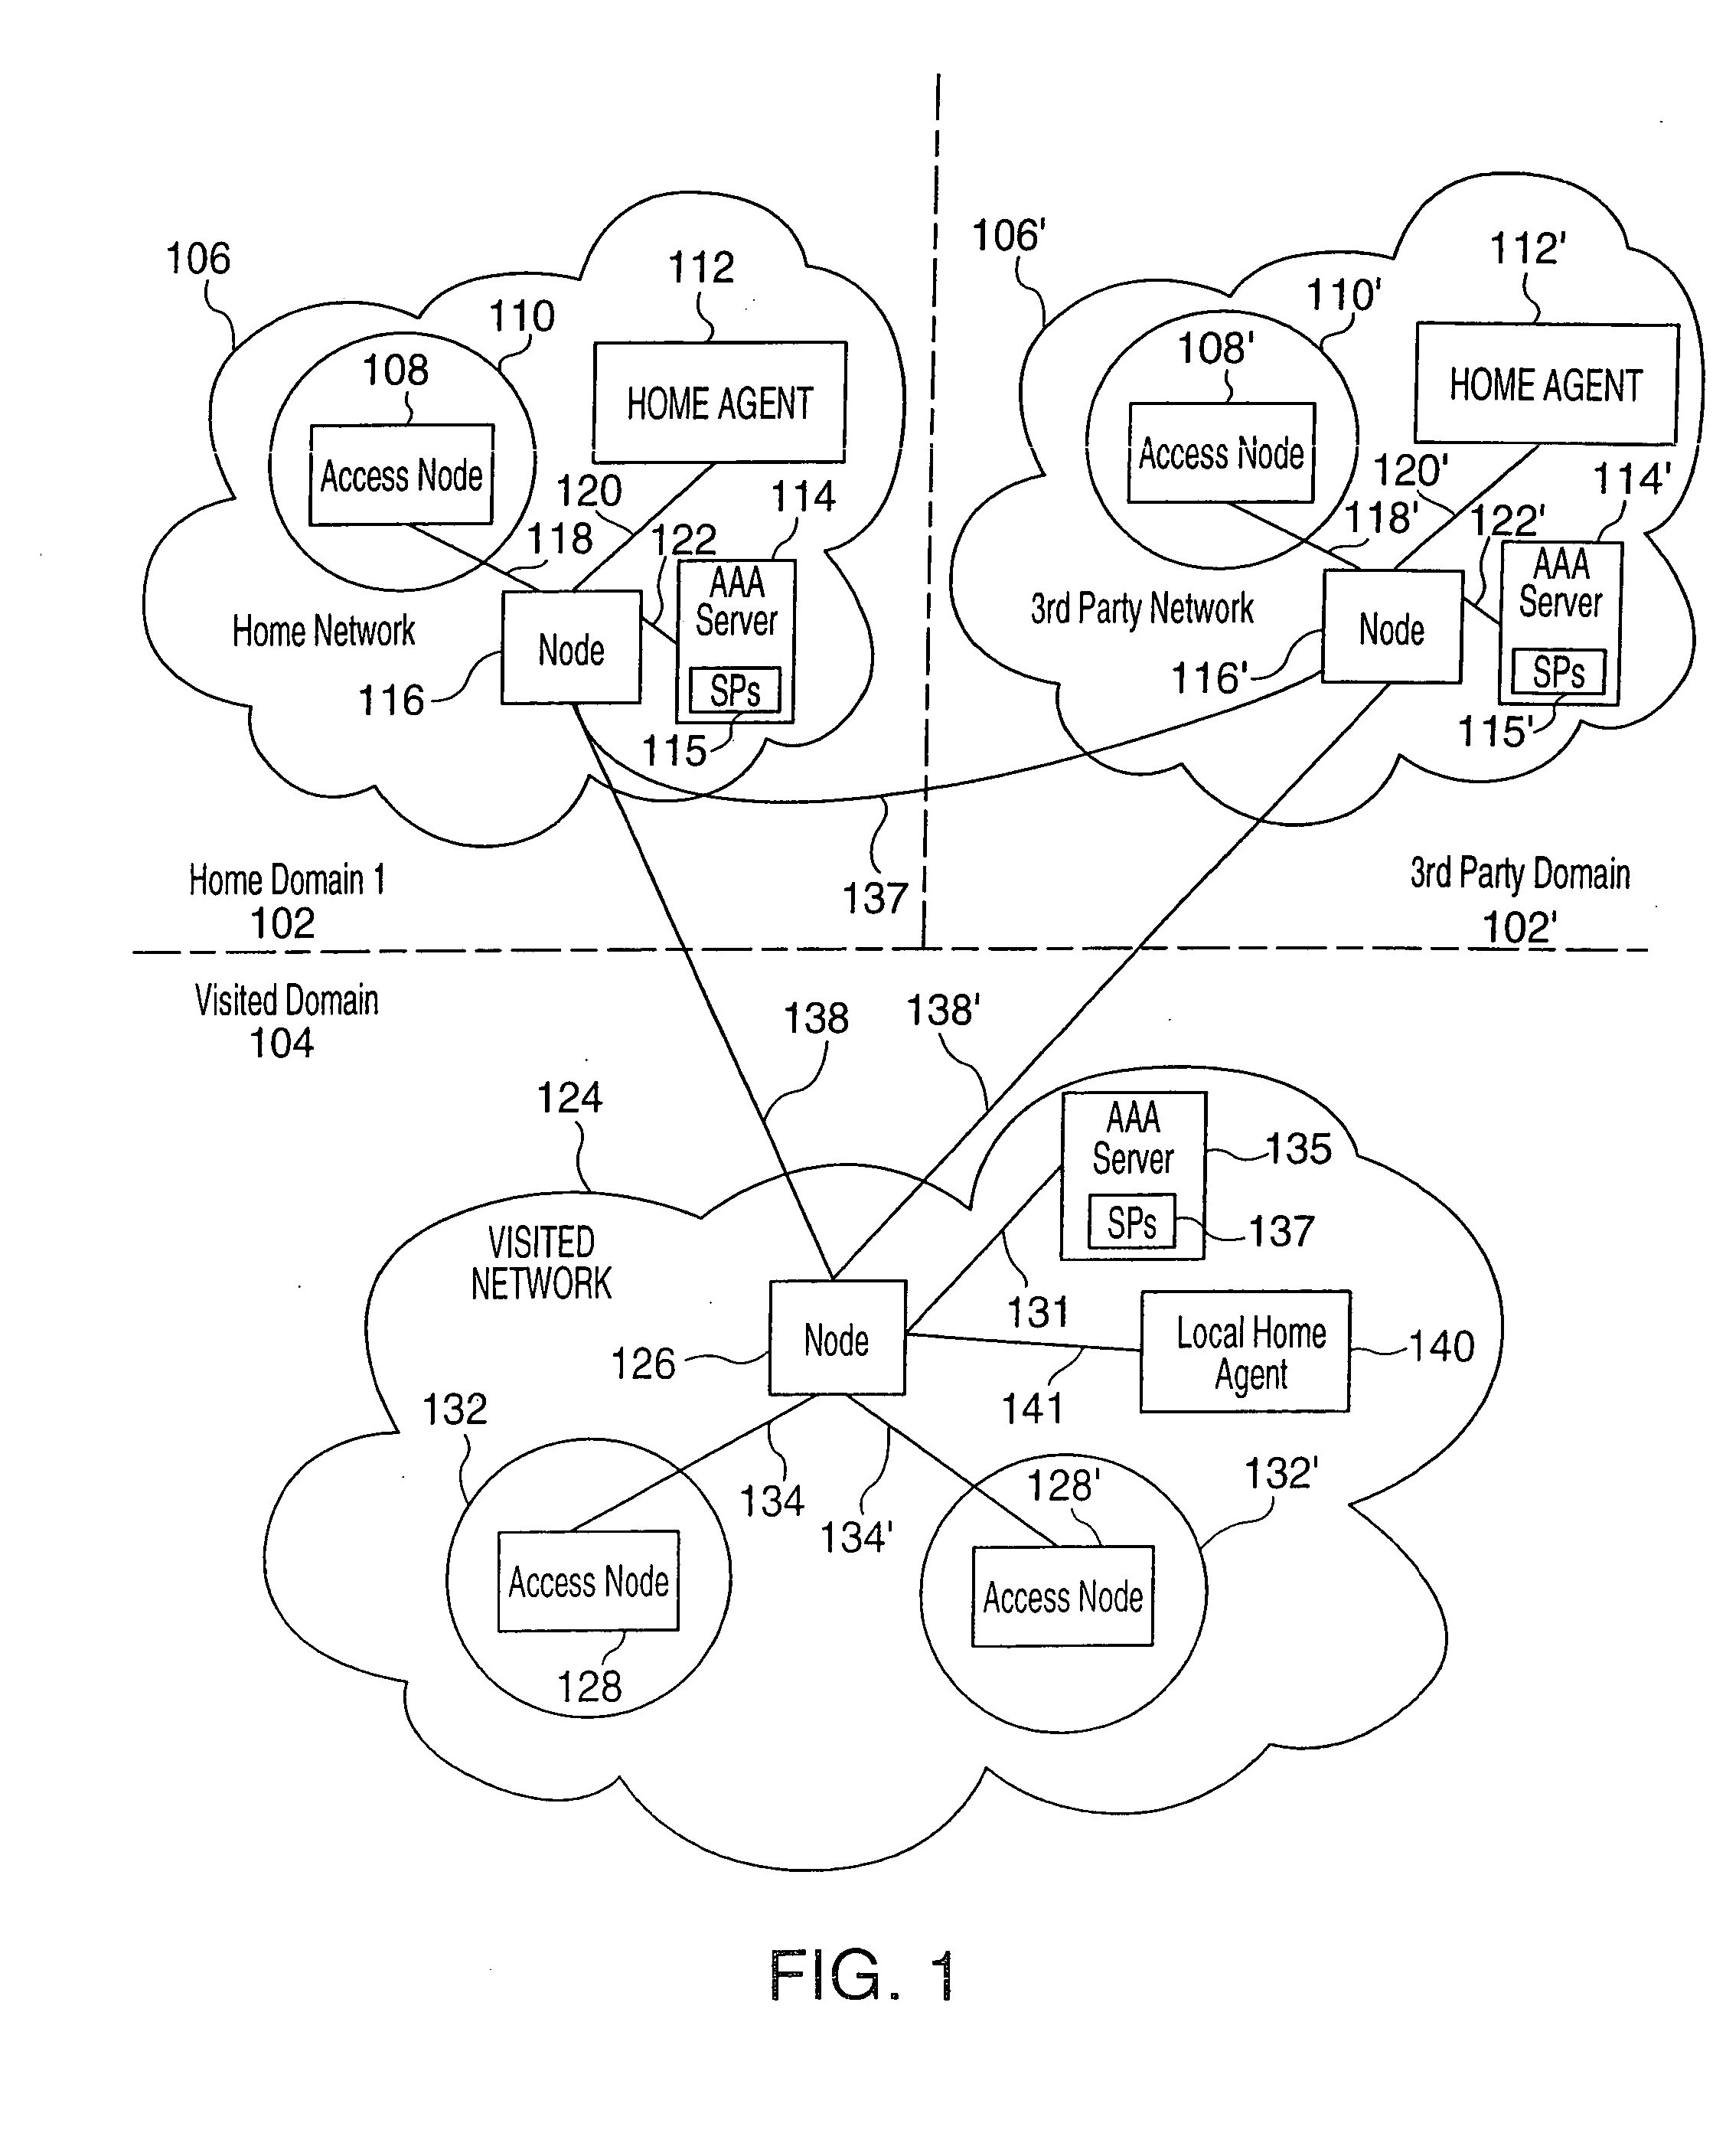 Method for extending mobile IP and AAA to enable integrated support for local access and roaming access connectivity